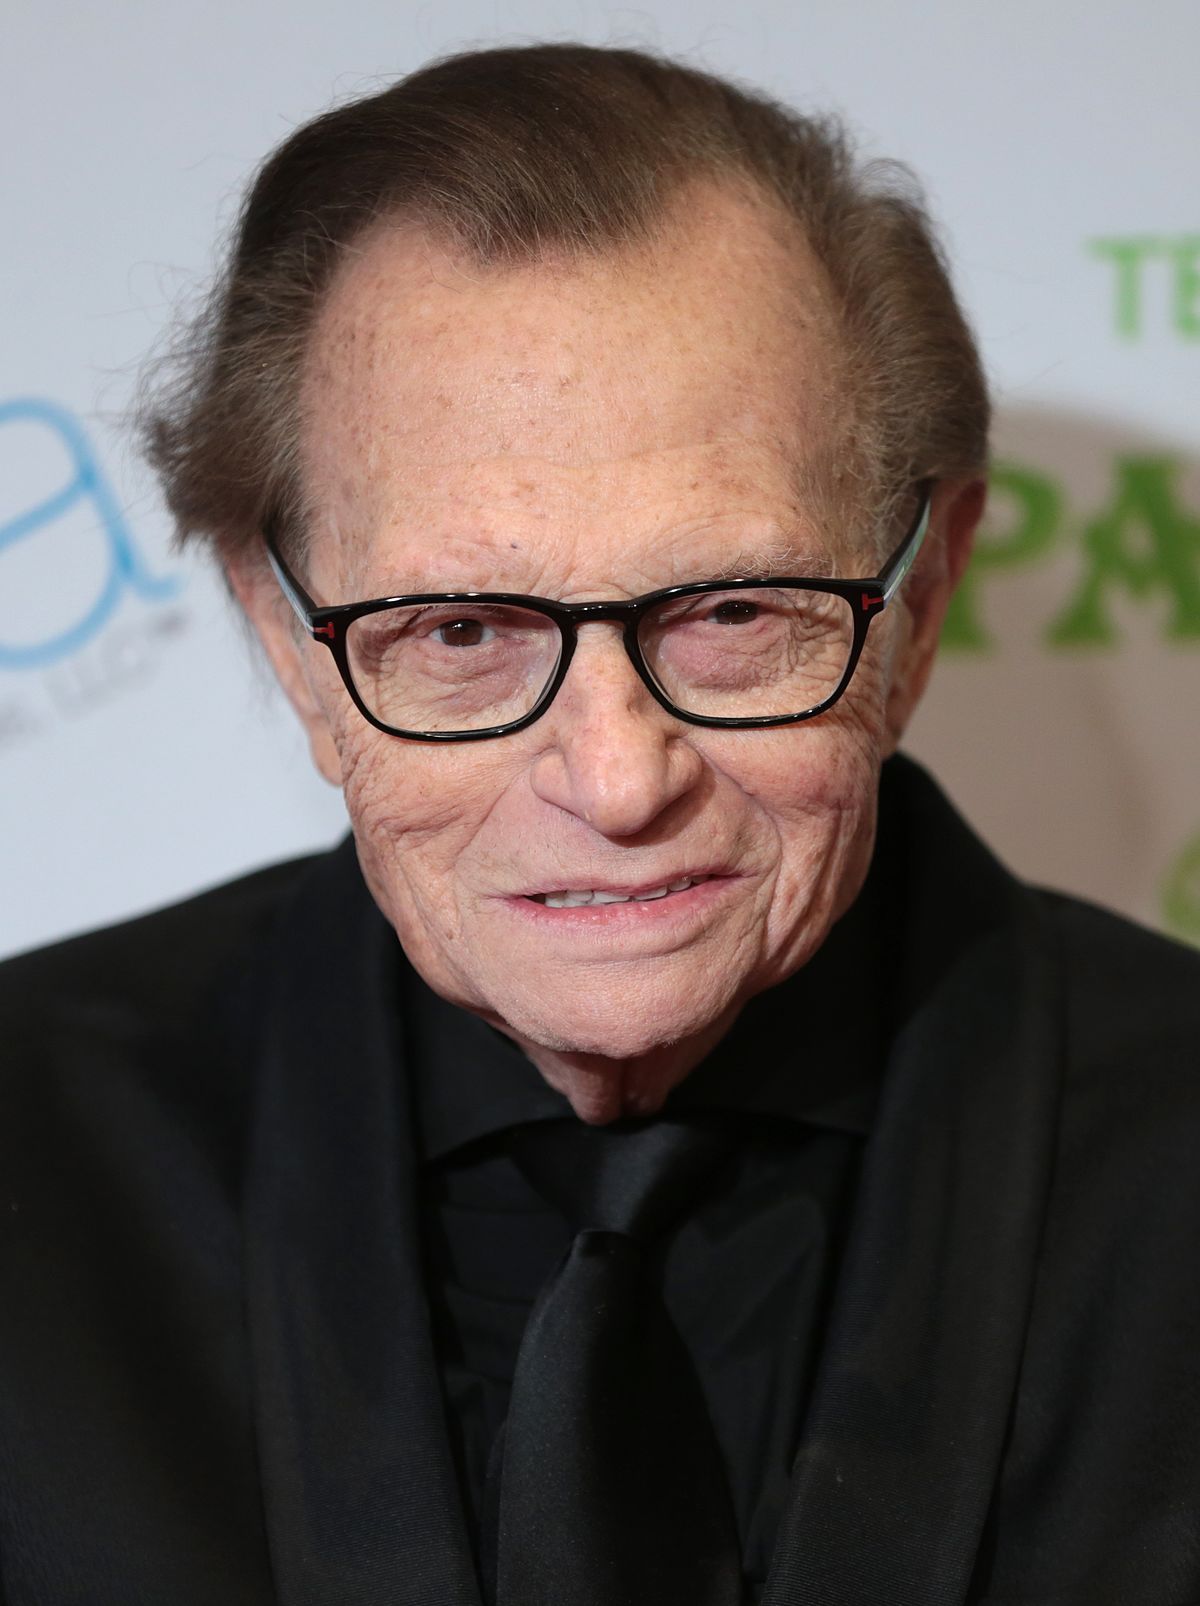 How tall is Larry King?